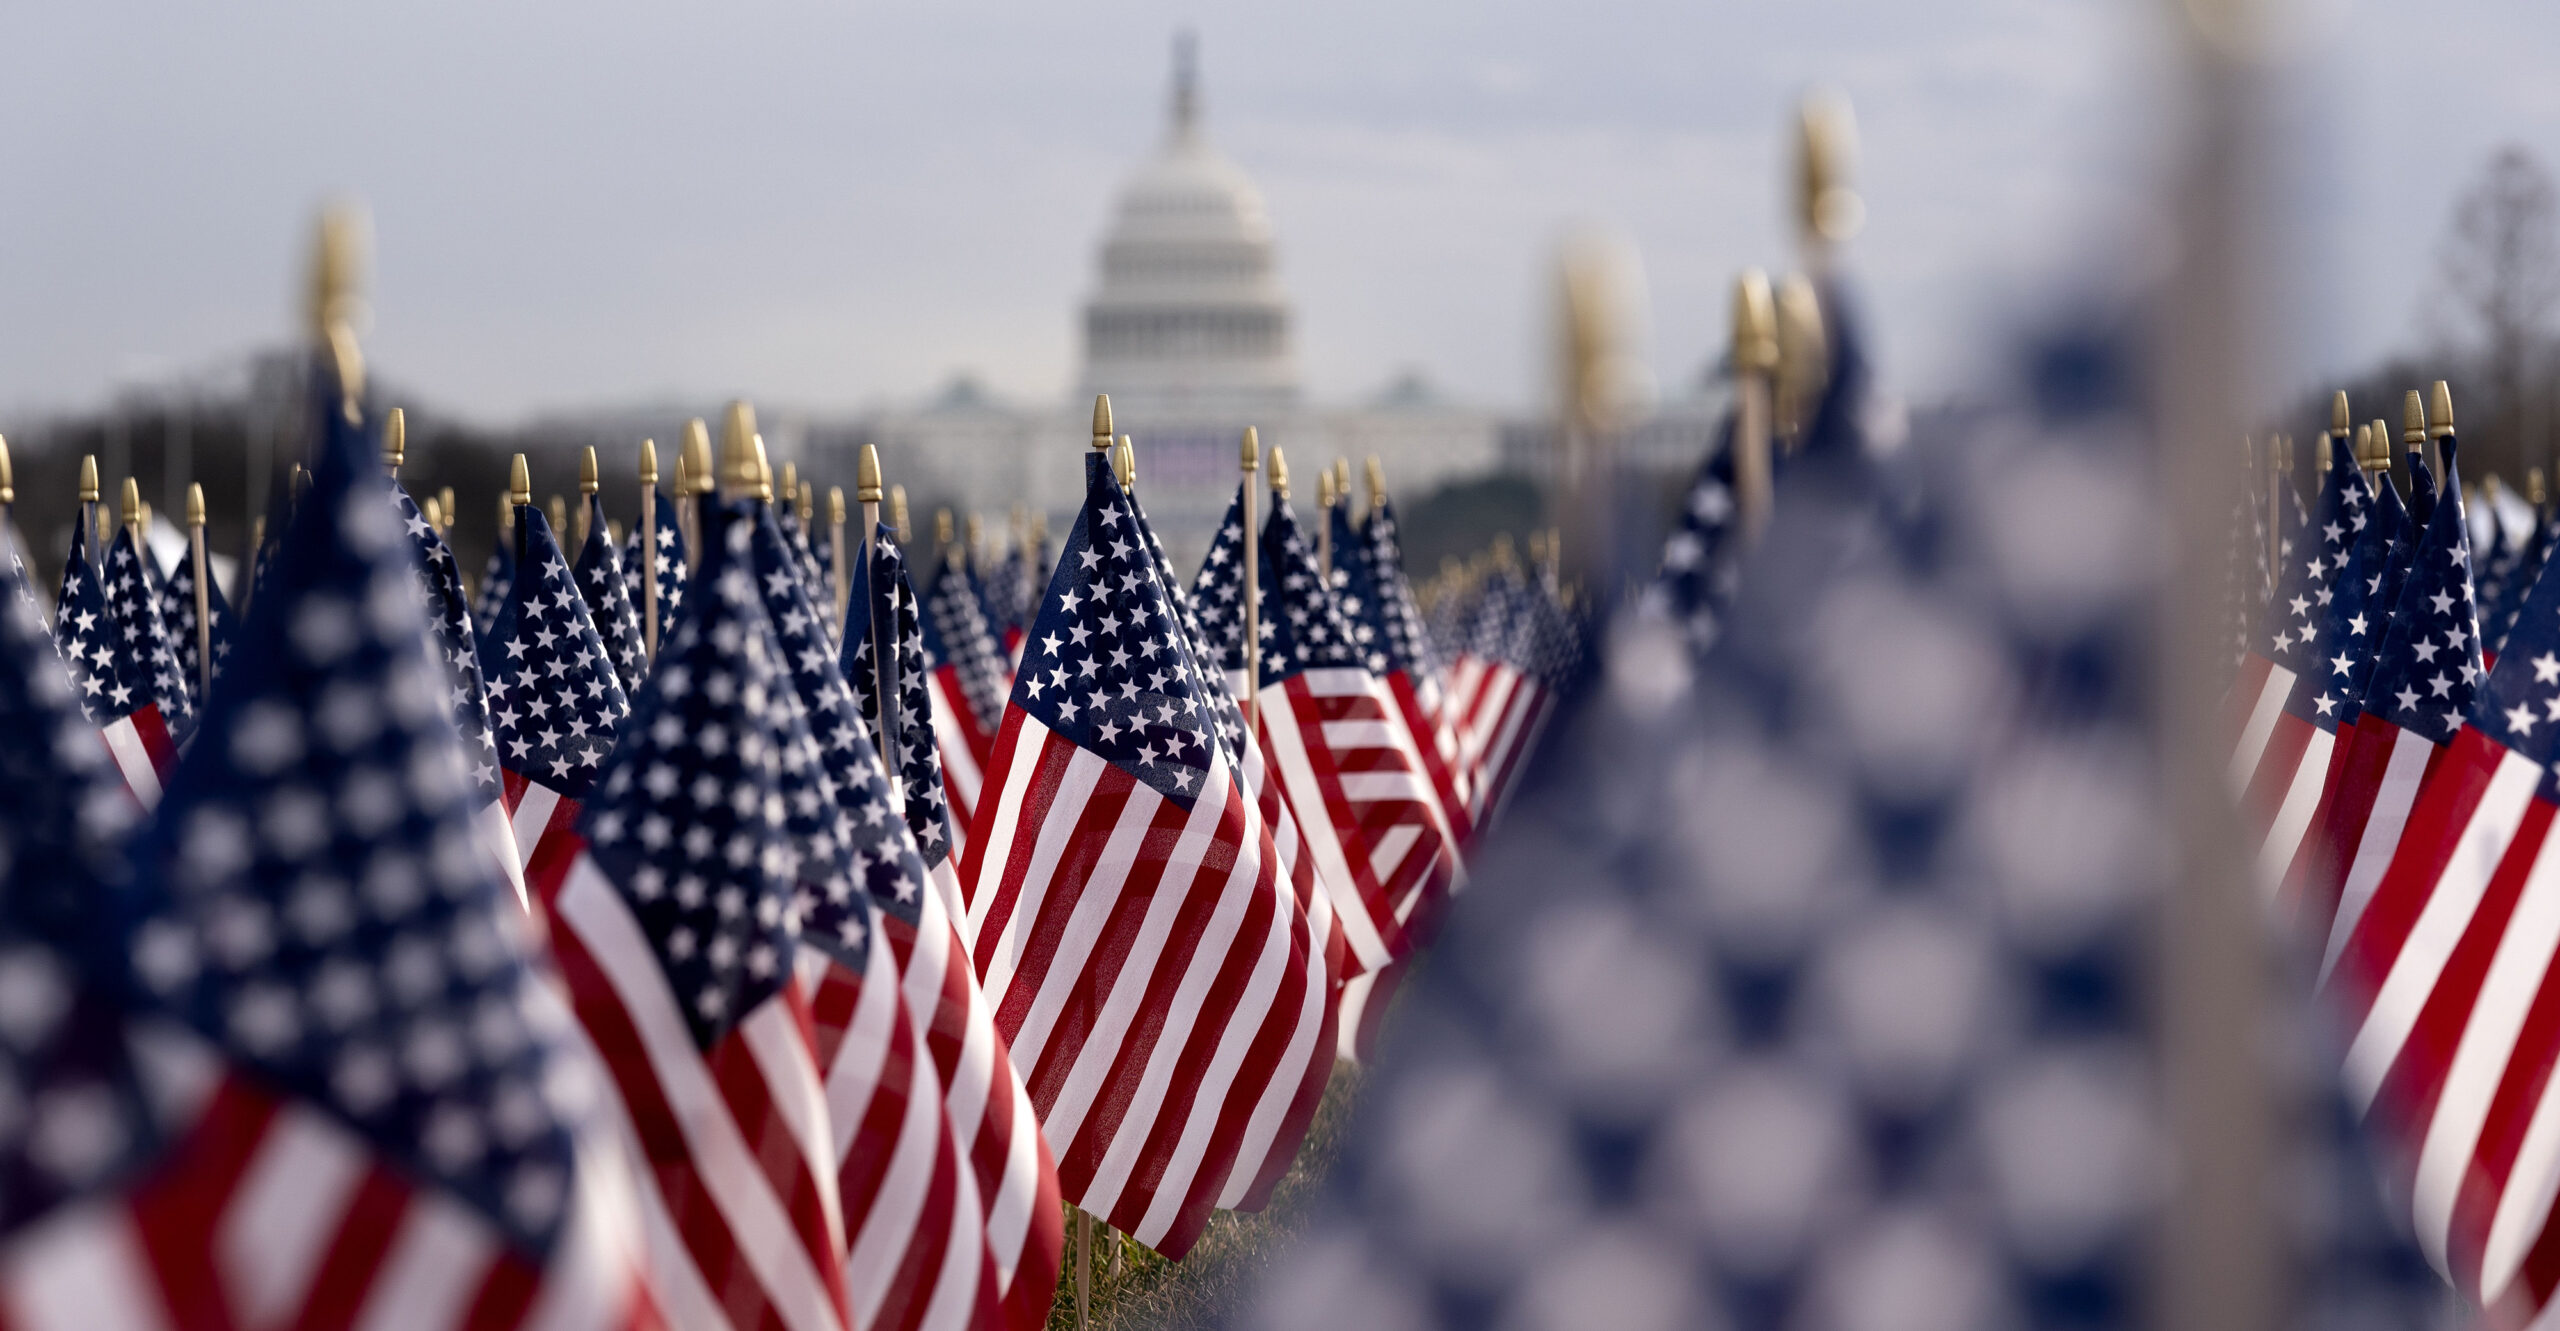 July 4th: Celebrating a Nation Founded on Protecting Freedom, Wealth of Its People